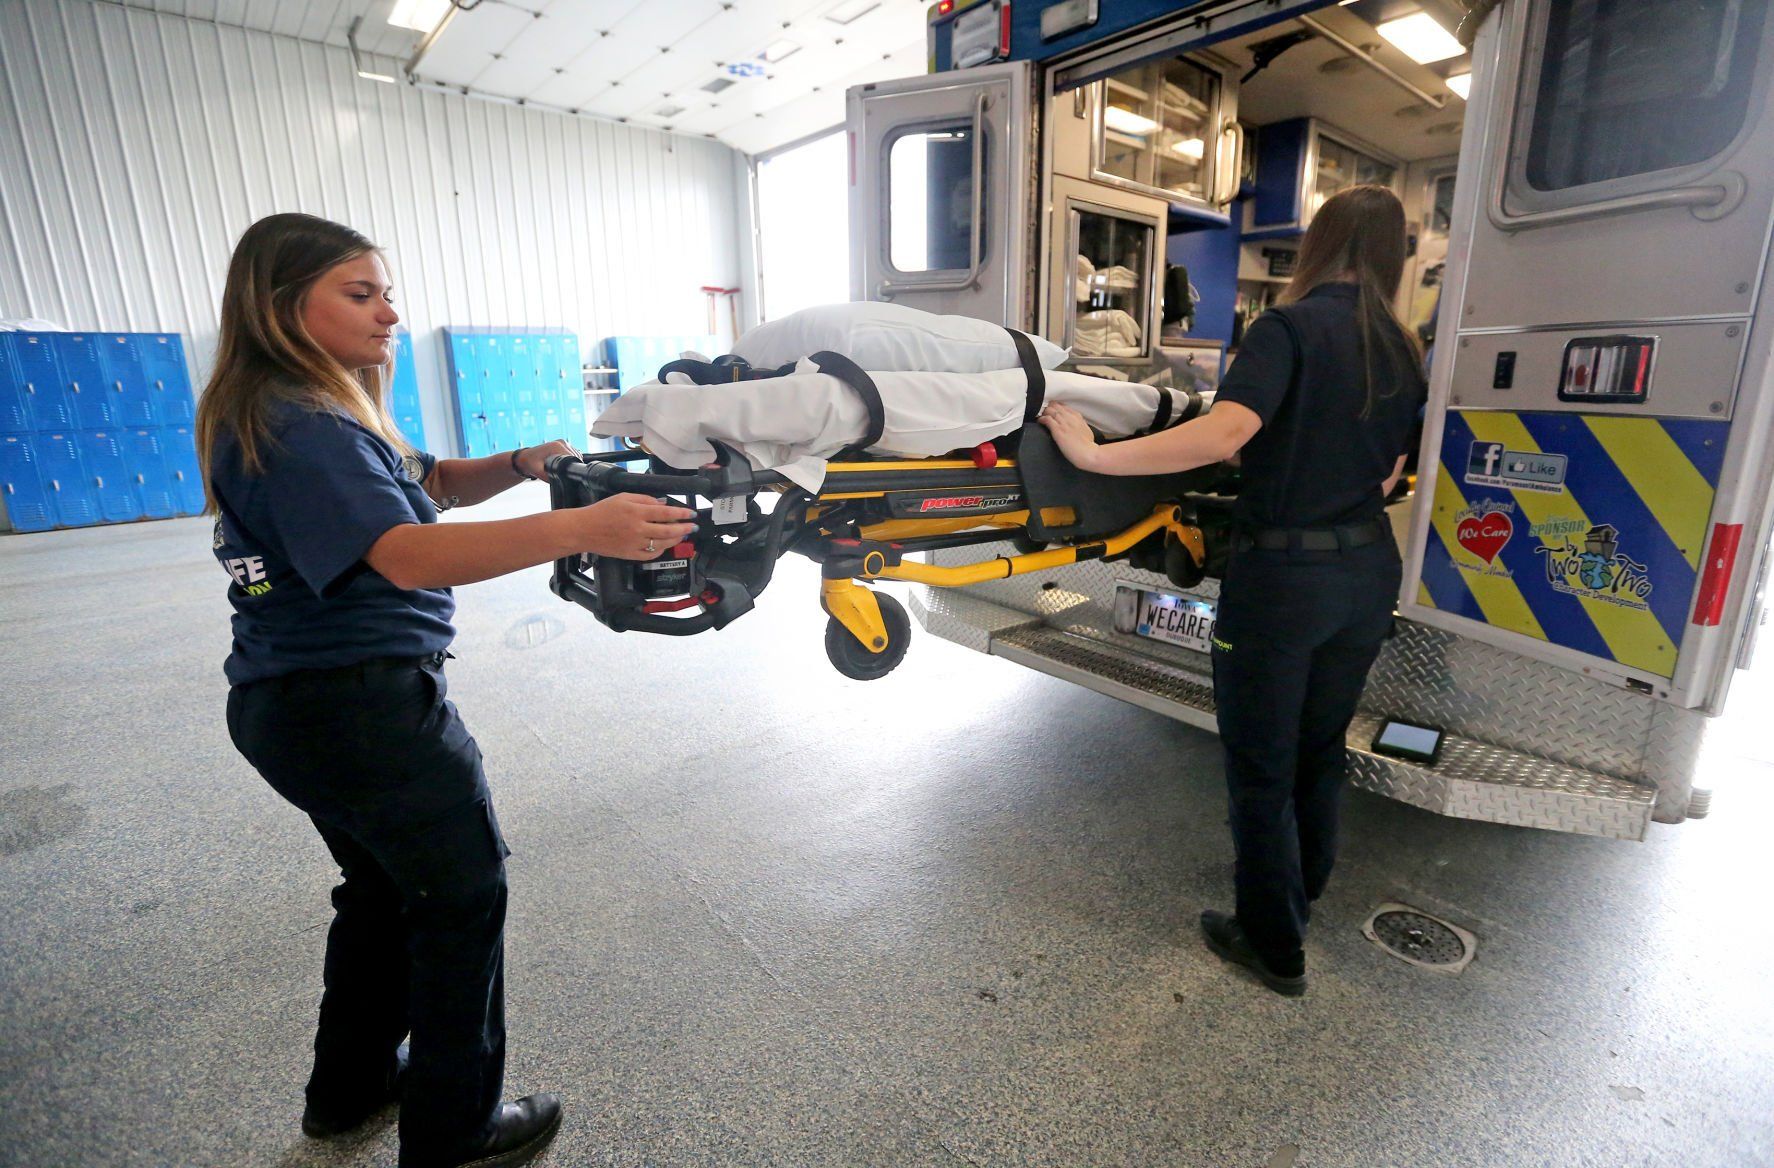 Bailey Dragusica (left) and Karoline Stratton check supplies in an ambulance at Paramount Ambulance in Dubuque on Tuesday, May 17, 2022.    PHOTO CREDIT: JESSICA REILLY